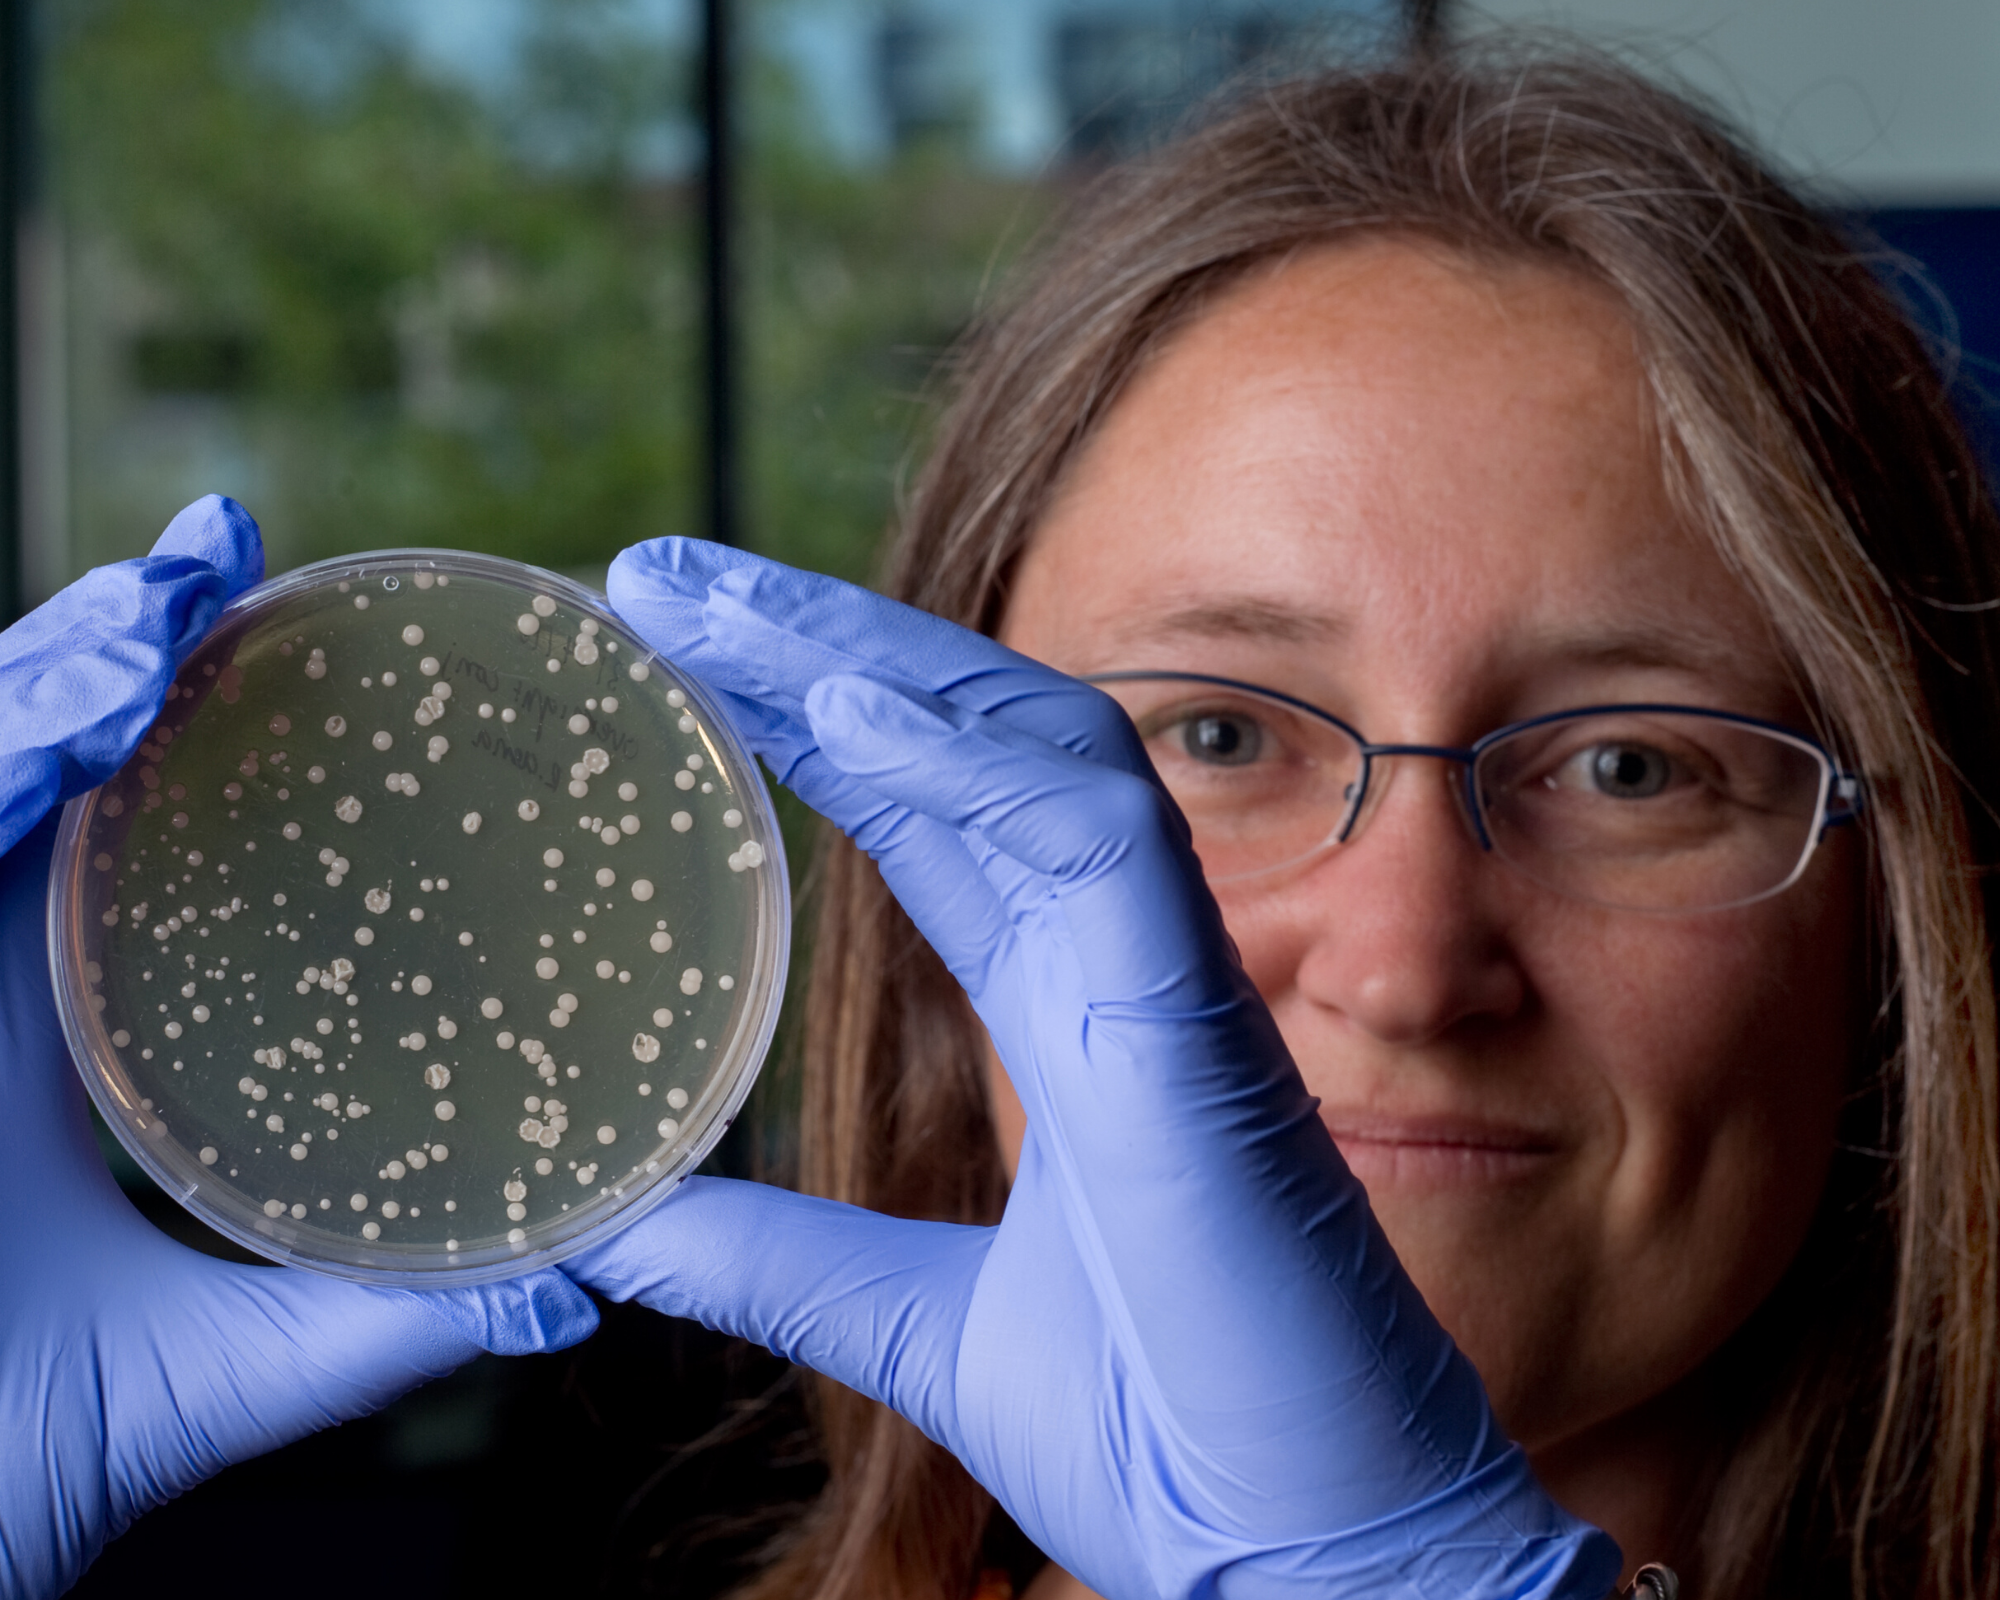 Katrine Whiteson, PhD. holding up a petri dish with specimens shown inside